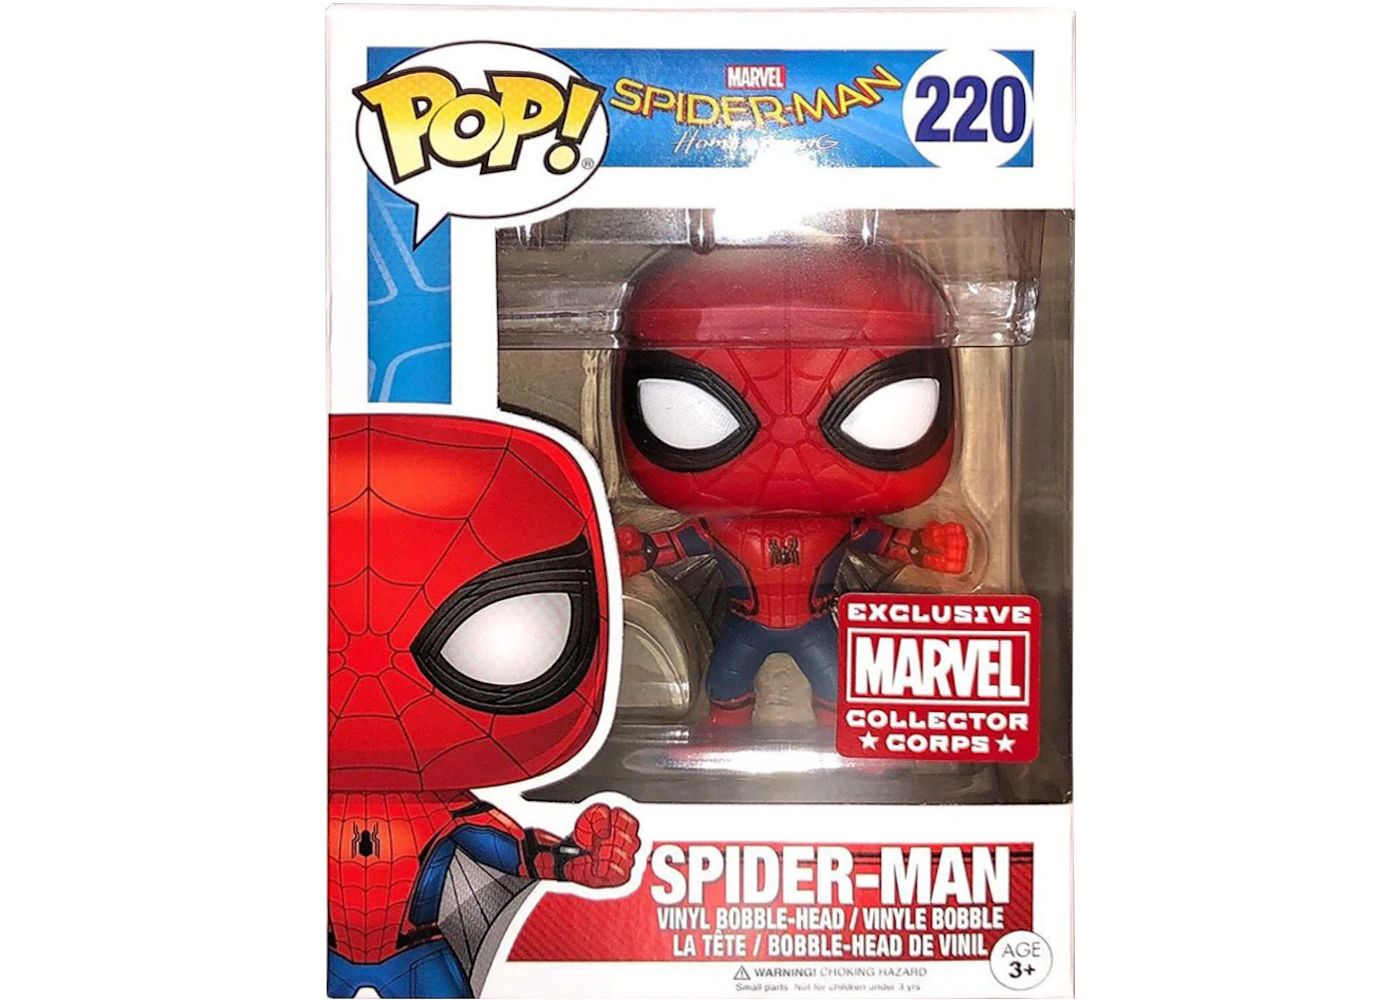 Pop! Marvel Spider-Man Homecoming Spider-Man Collectors Corp Exclusive Bobble-Head Figure #220 - US